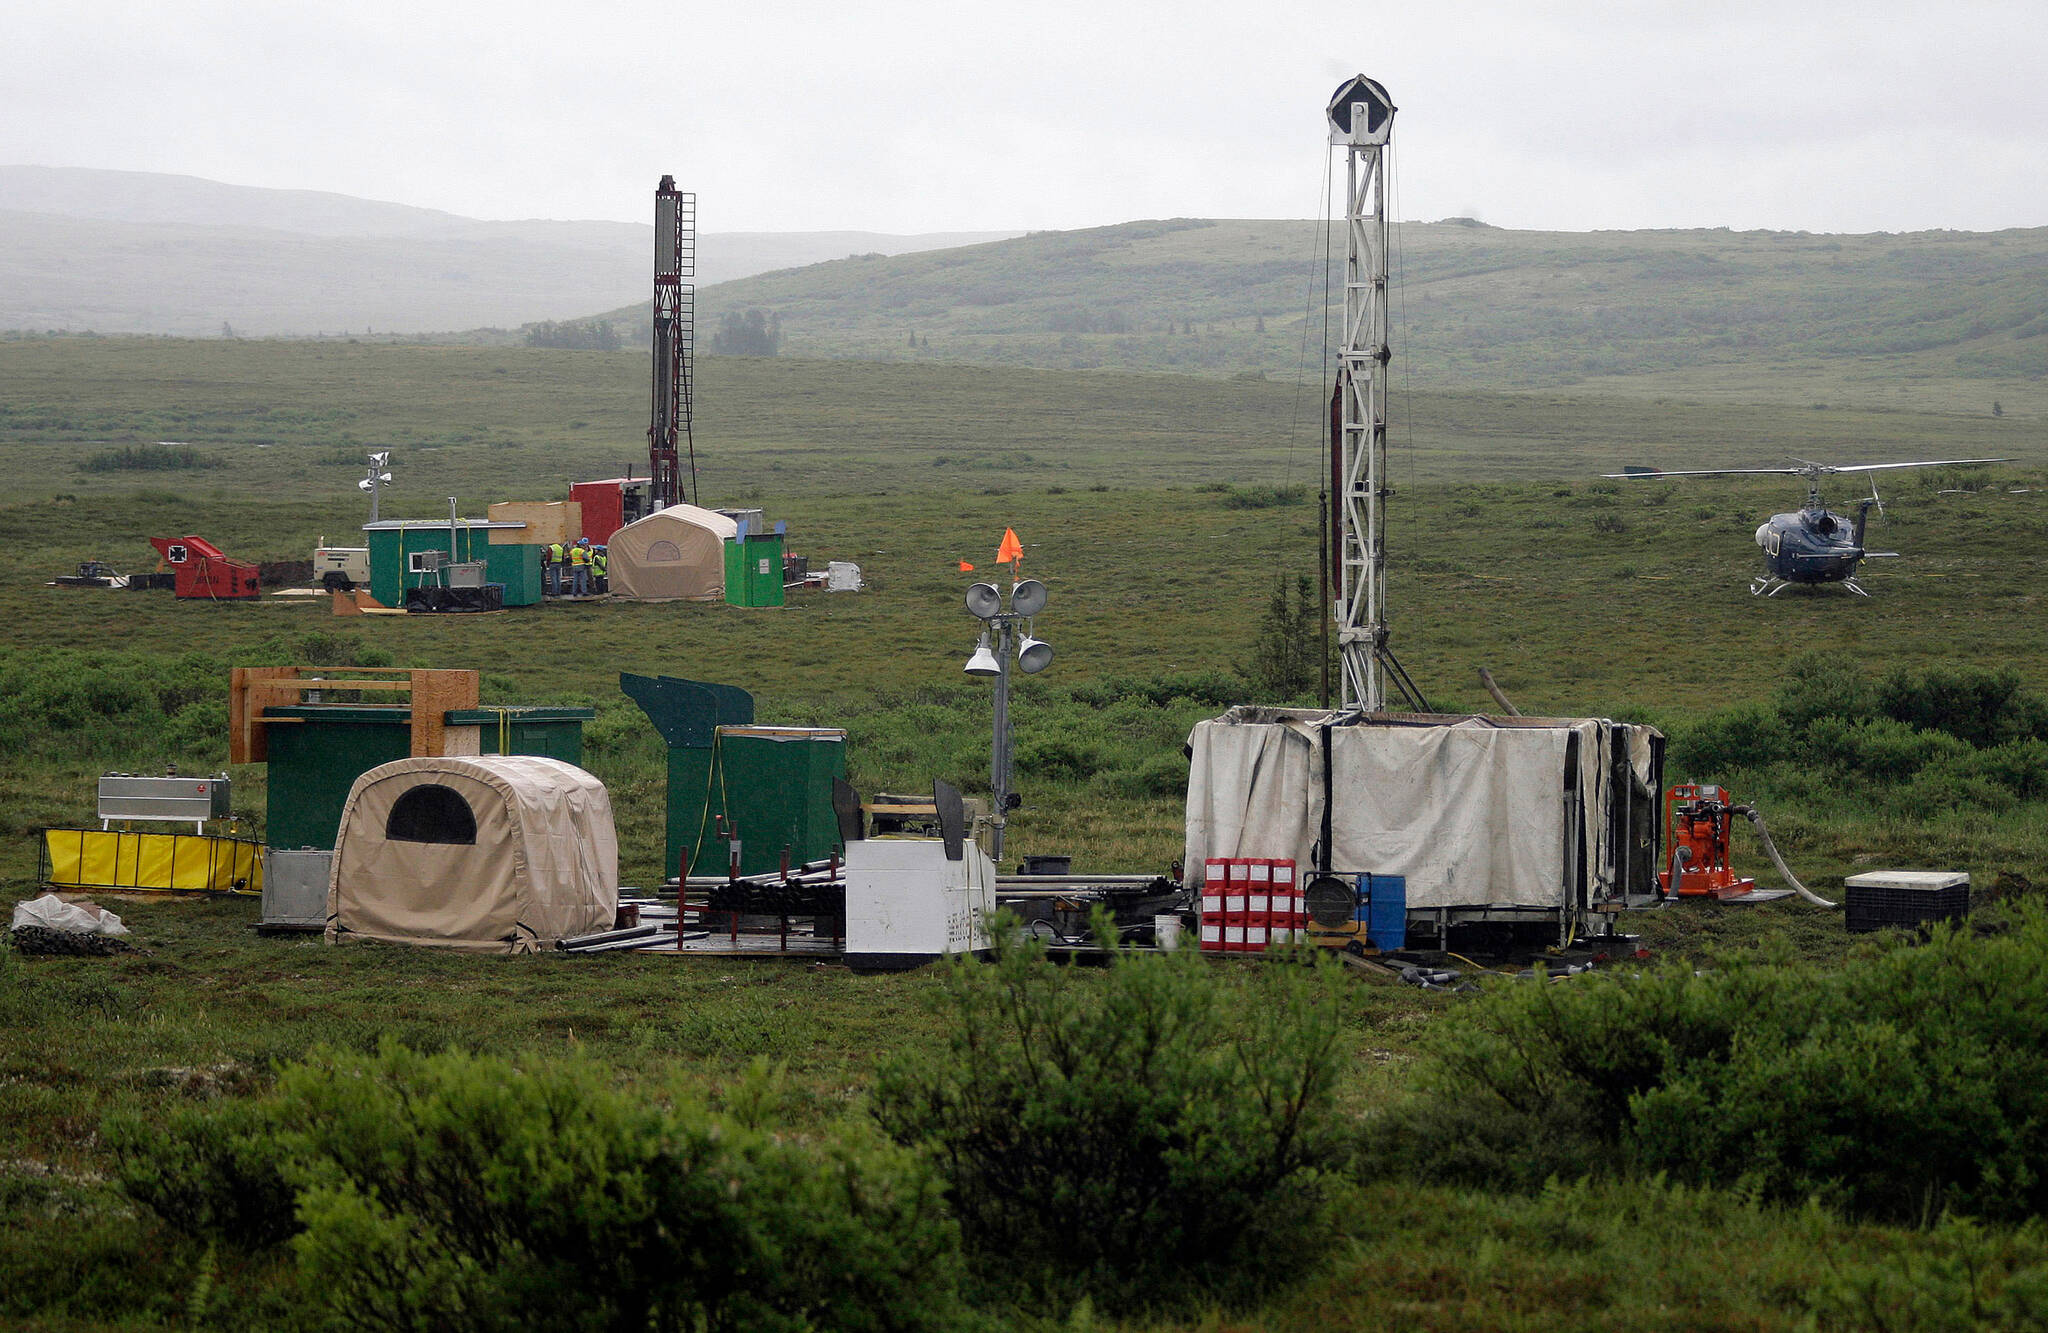 AP Photo / Al Grillo 
In this July 13, 2007, photo, workers with the Pebble Mine project test drill in the Bristol Bay region of Alaska, near the village of Iliamma.